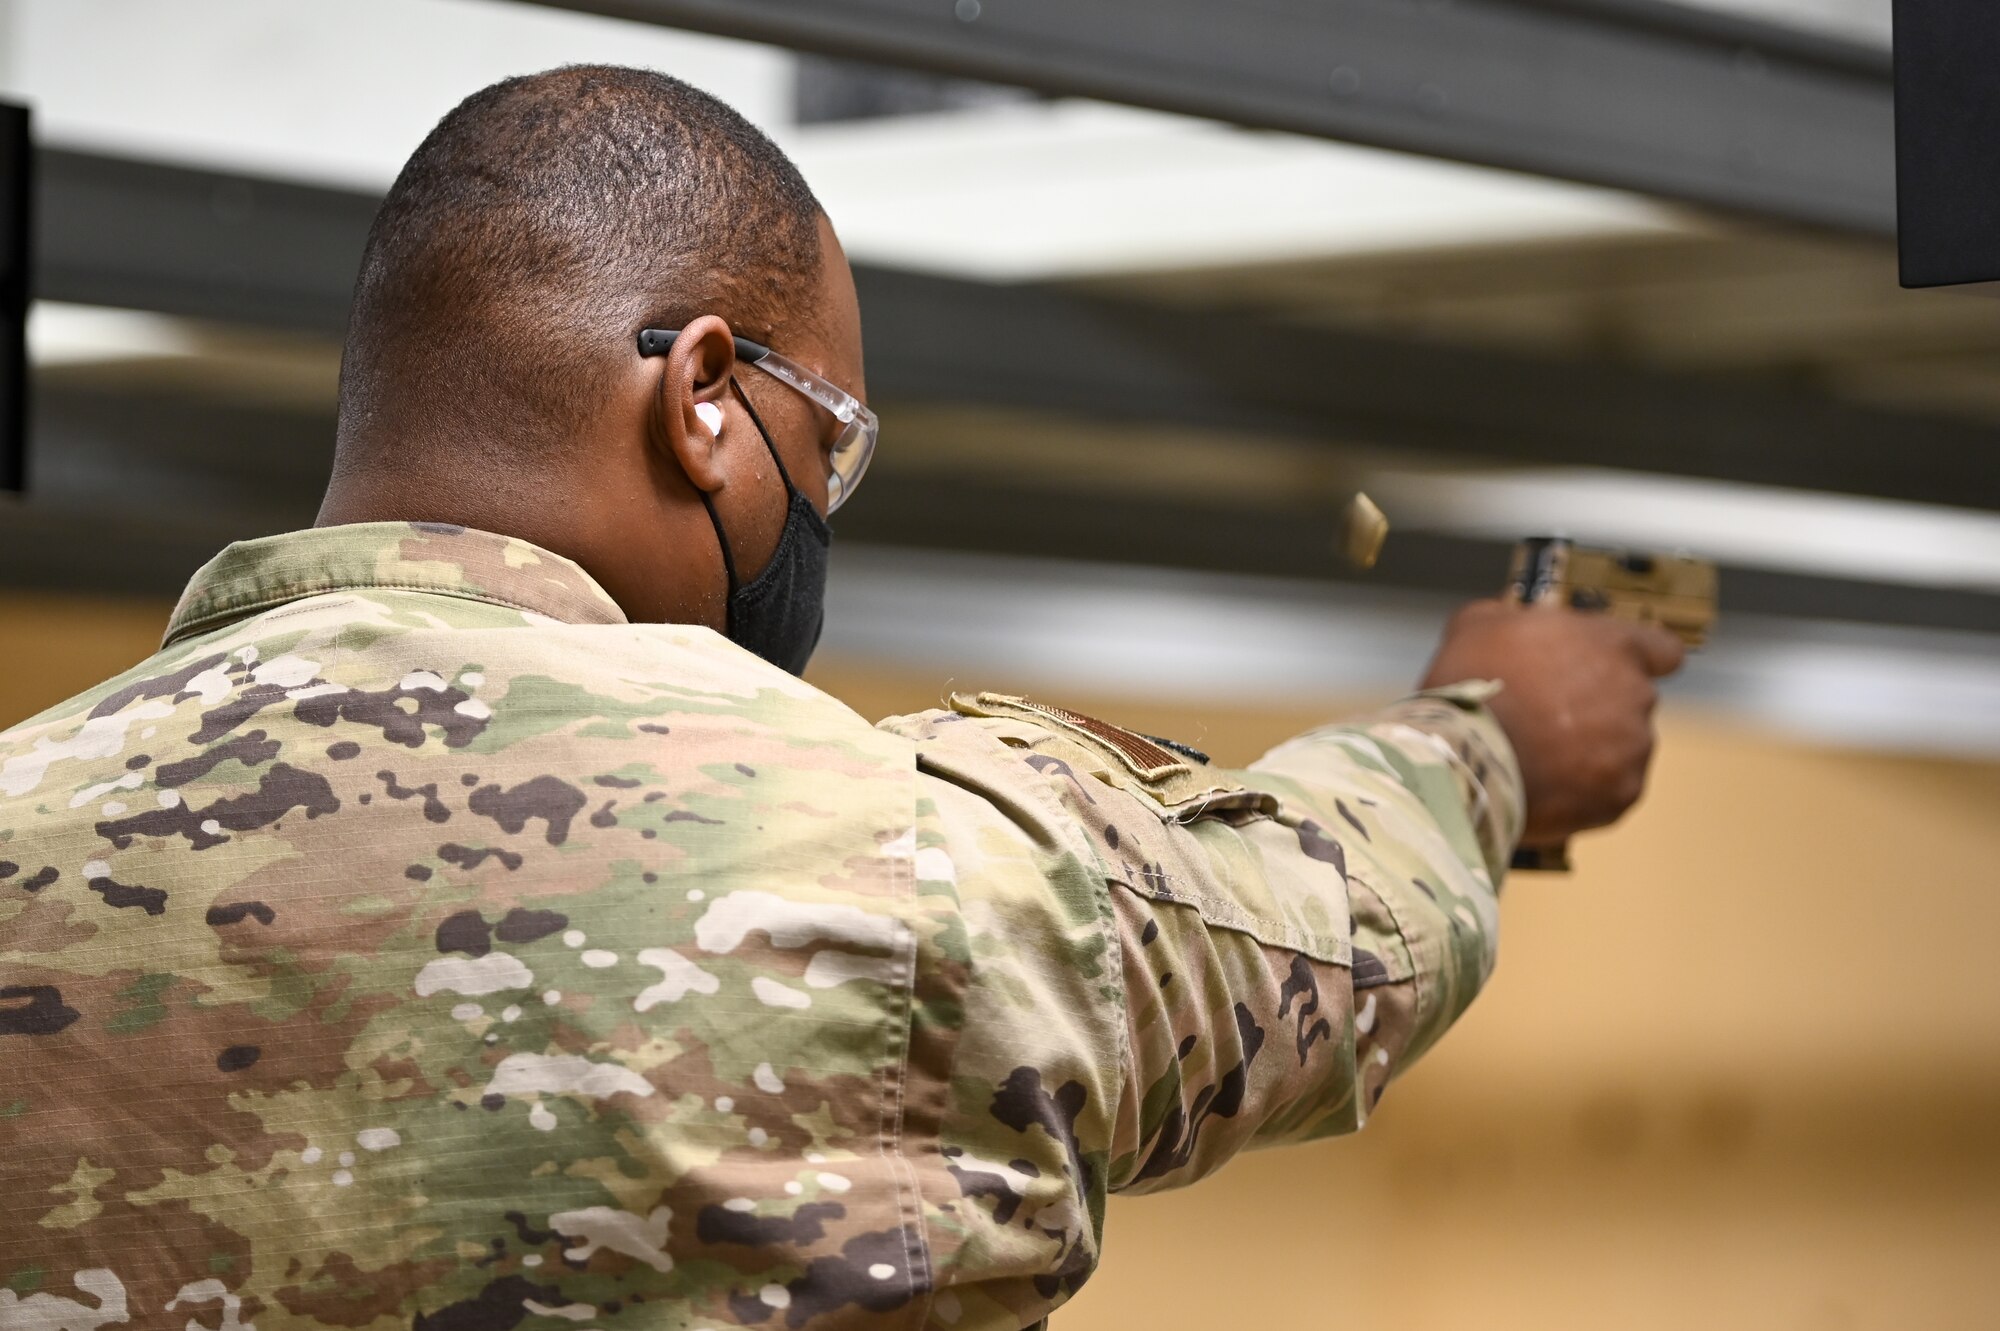 Tech. Sgt. Kandall Emile, 75th Security Forces Squadron, participates in the National Police Week pistol shooting competition May 13, 2021, at Hill Air Force Base, Utah. The competition included one-handed shooting and was one of many events 75th Security Forces Squadron hosted to commemorate the week to honor the sacrifices of the law enforcement community. (U.S. Air Force photo by Cynthia Griggs)